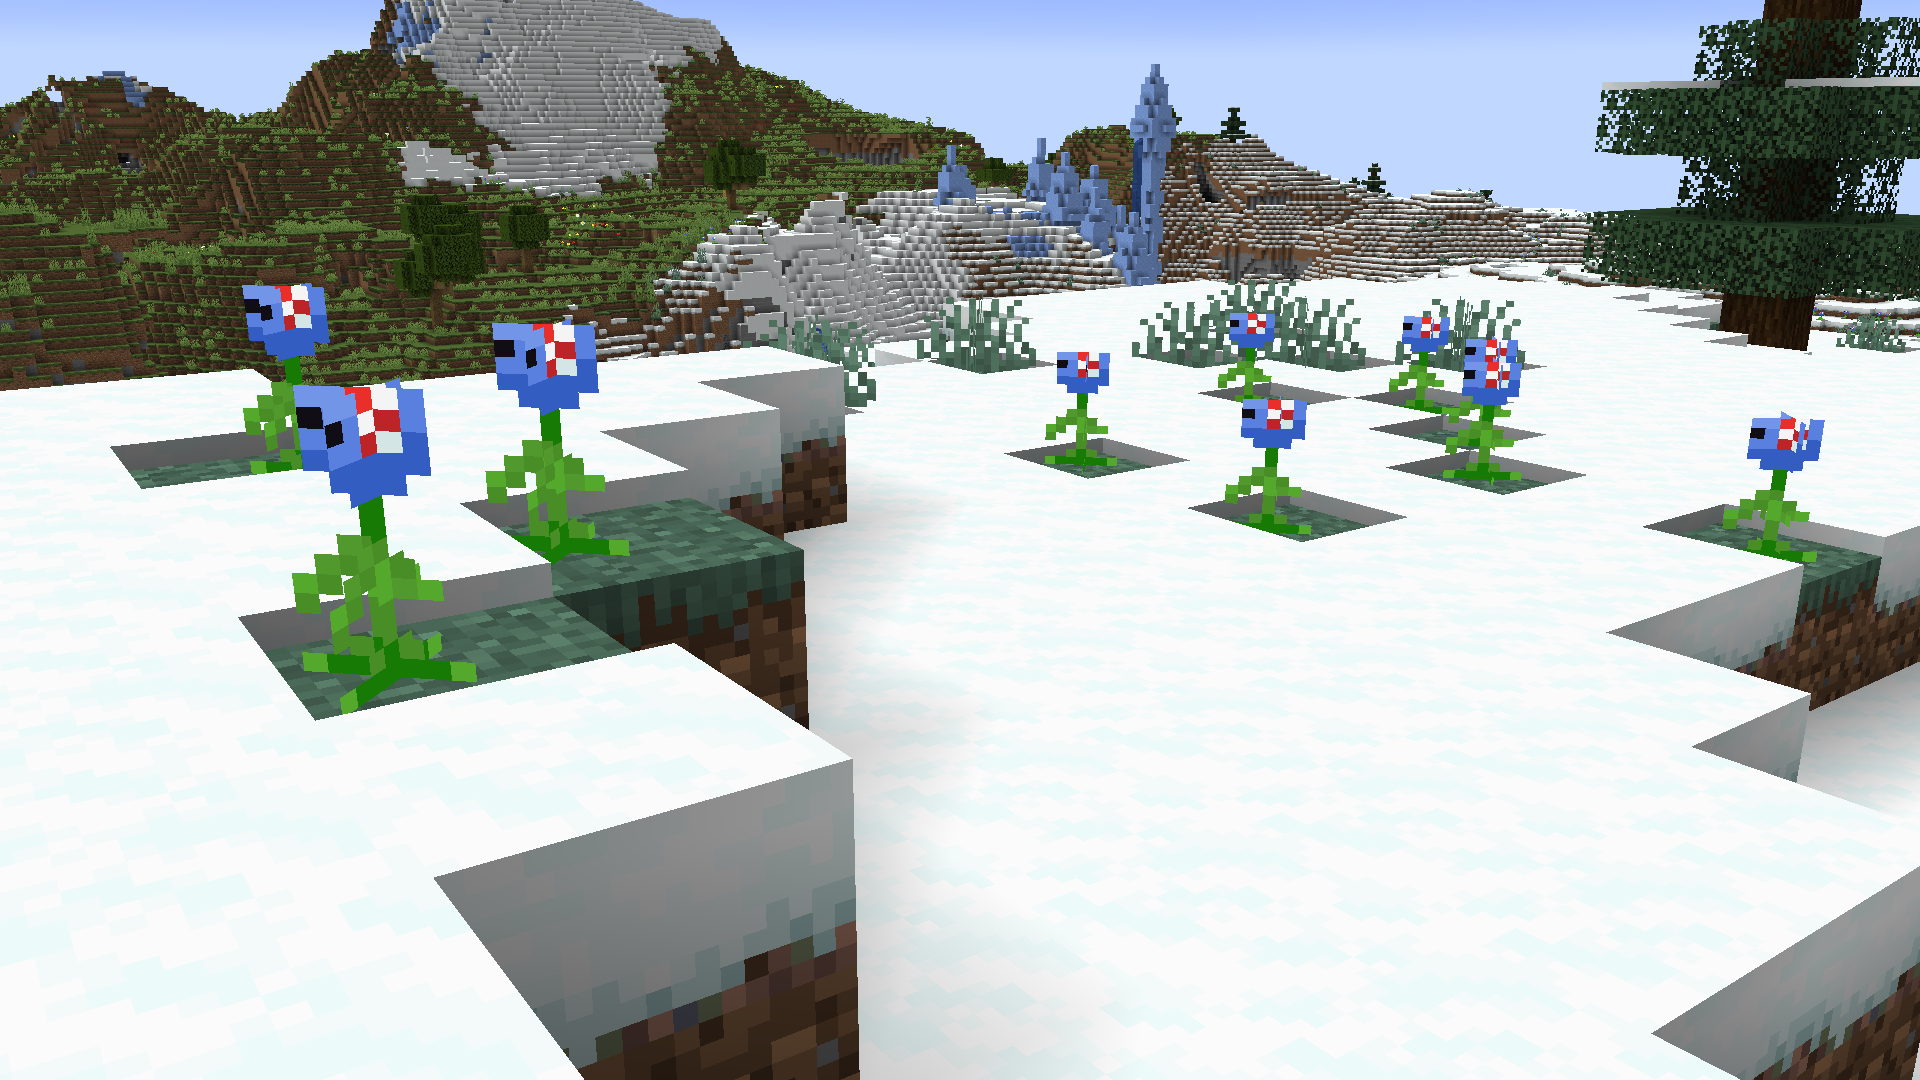 Flower Patch in Snowy Plains